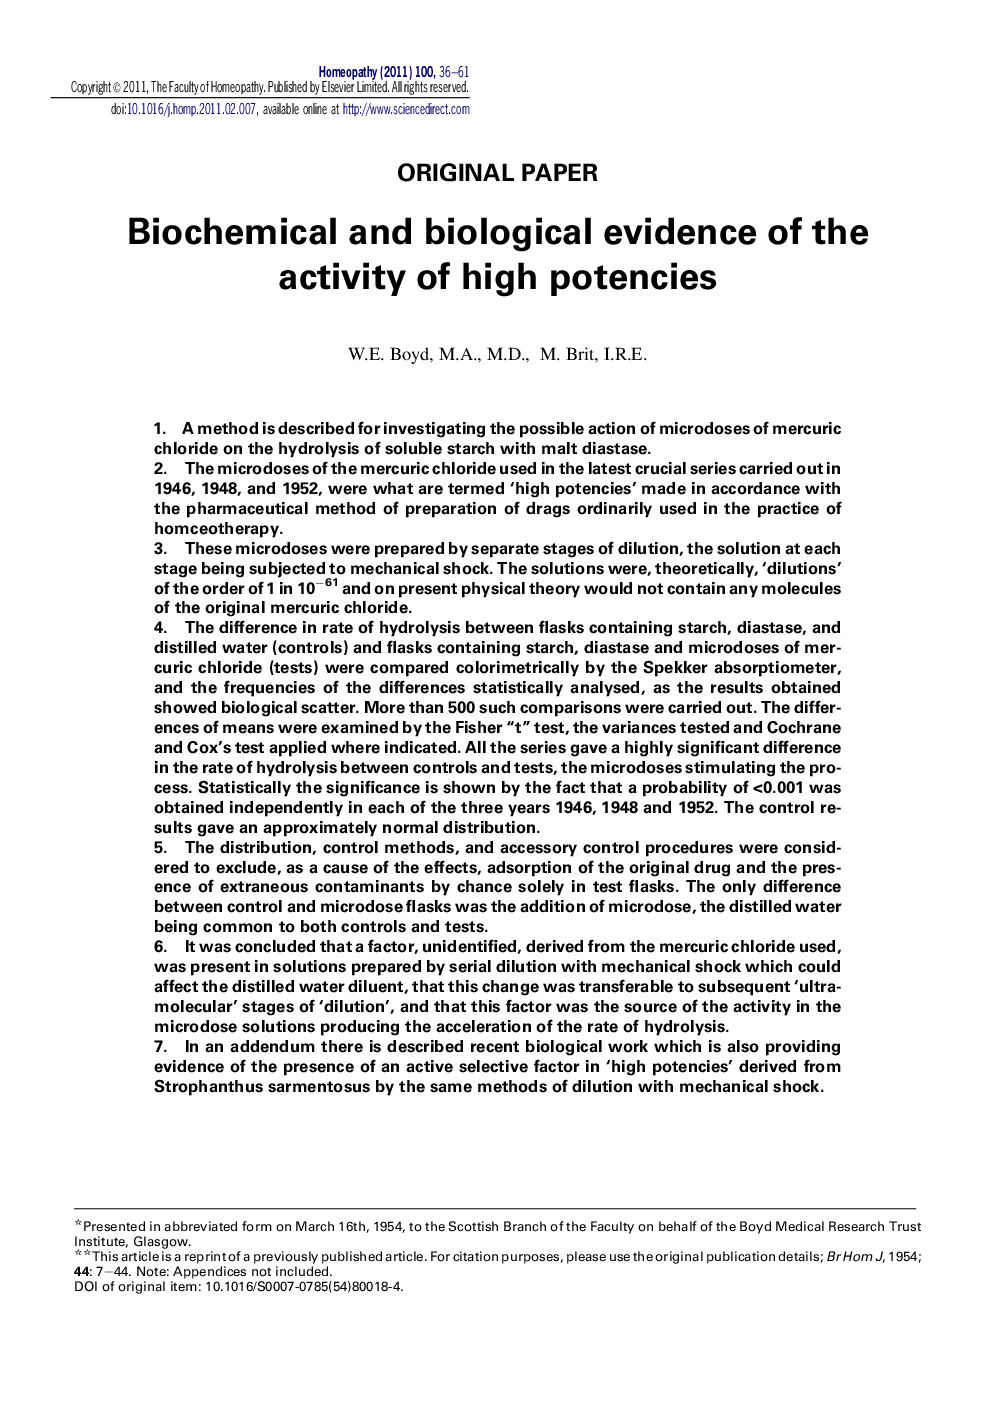 Biochemical and biological evidence of the activity of high potencies 